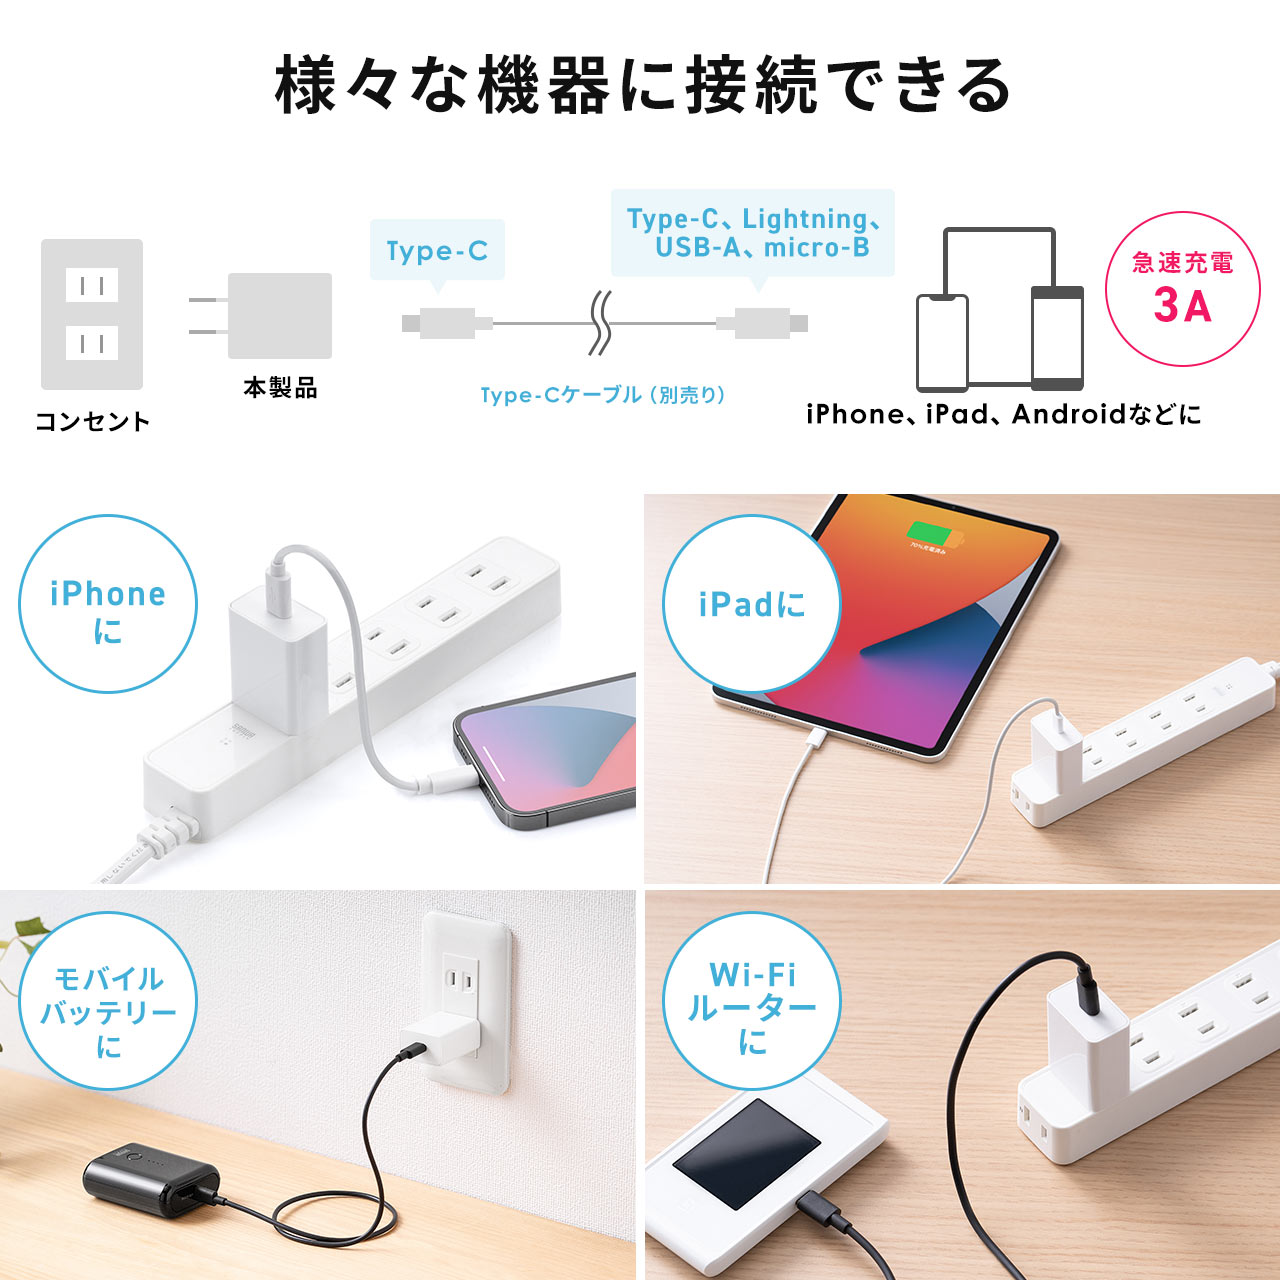 USB充電器 Type-C 1ポート 3A コンパクト PSE適合品 Android